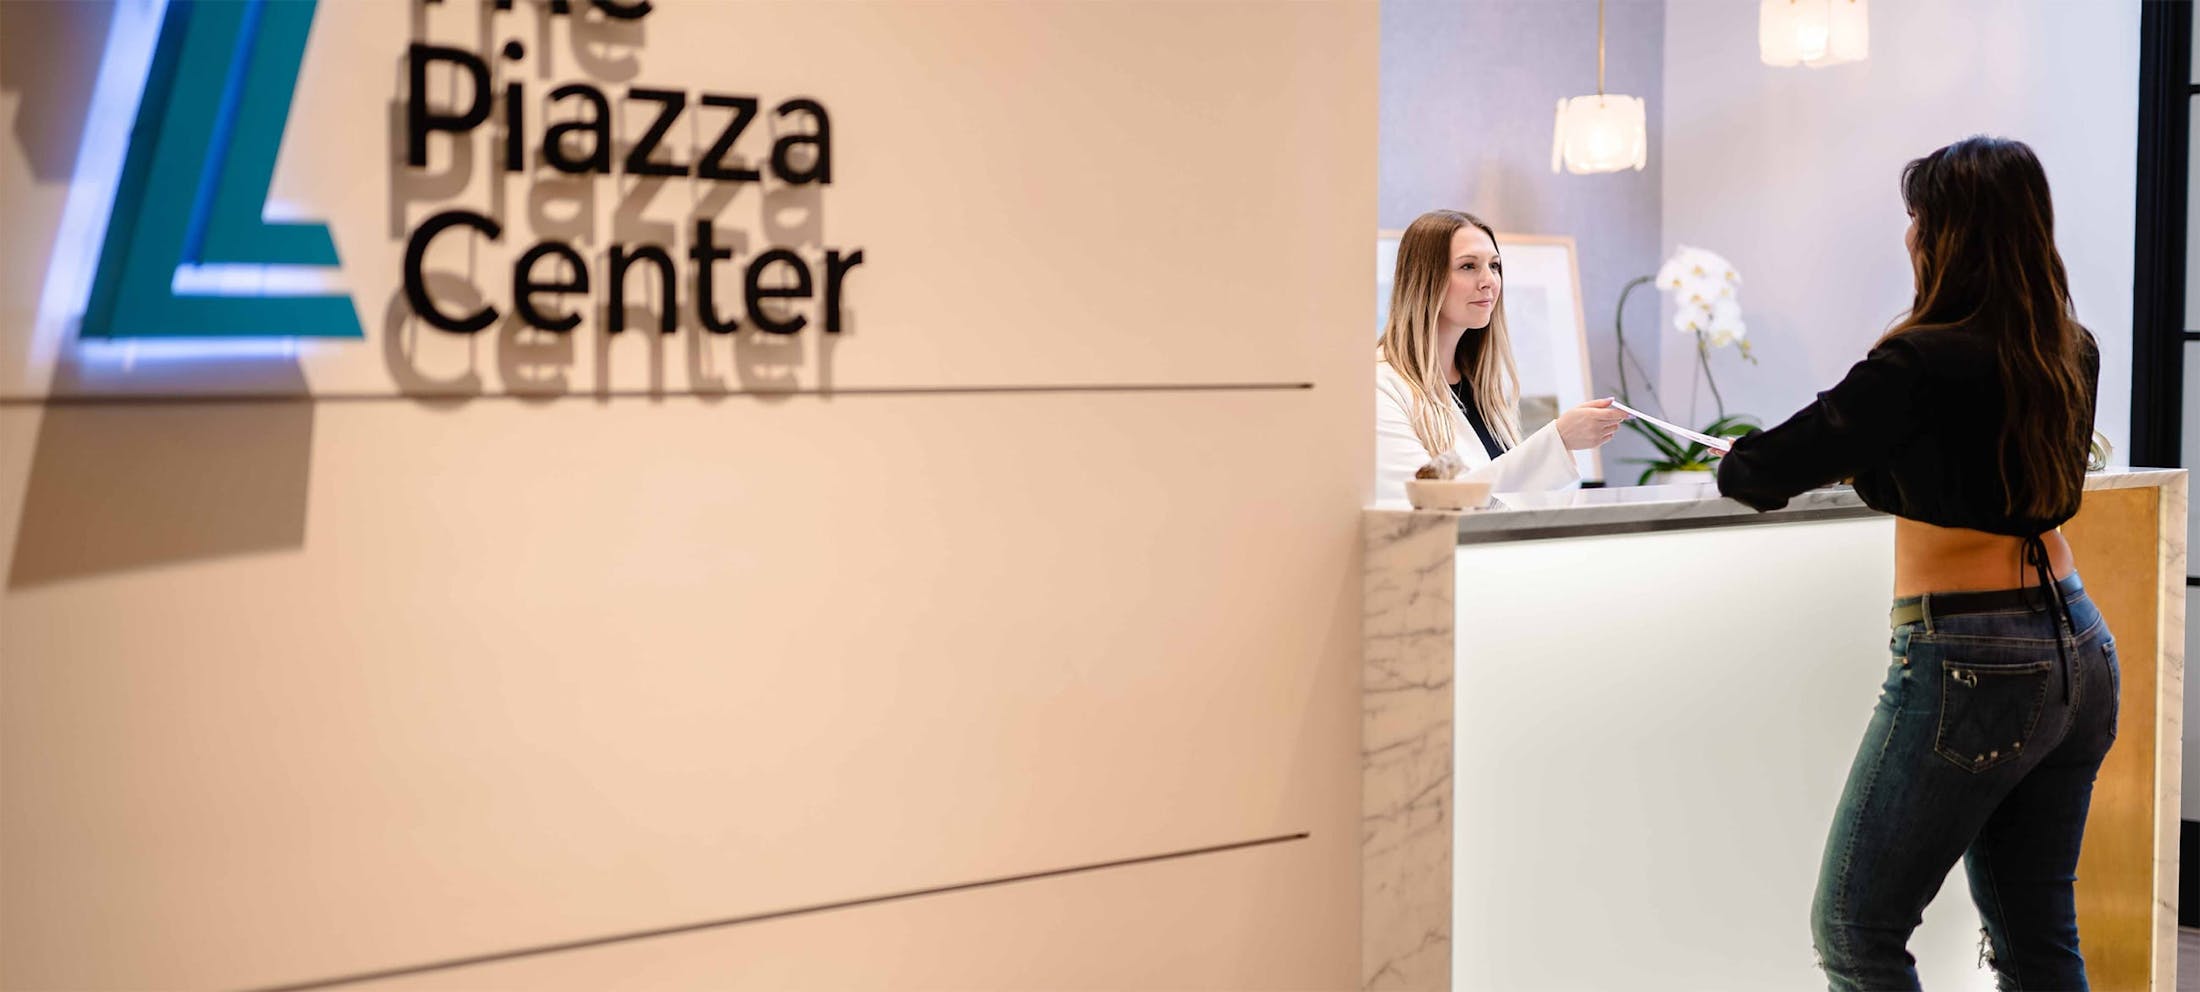 Front desk at The Piazza Center